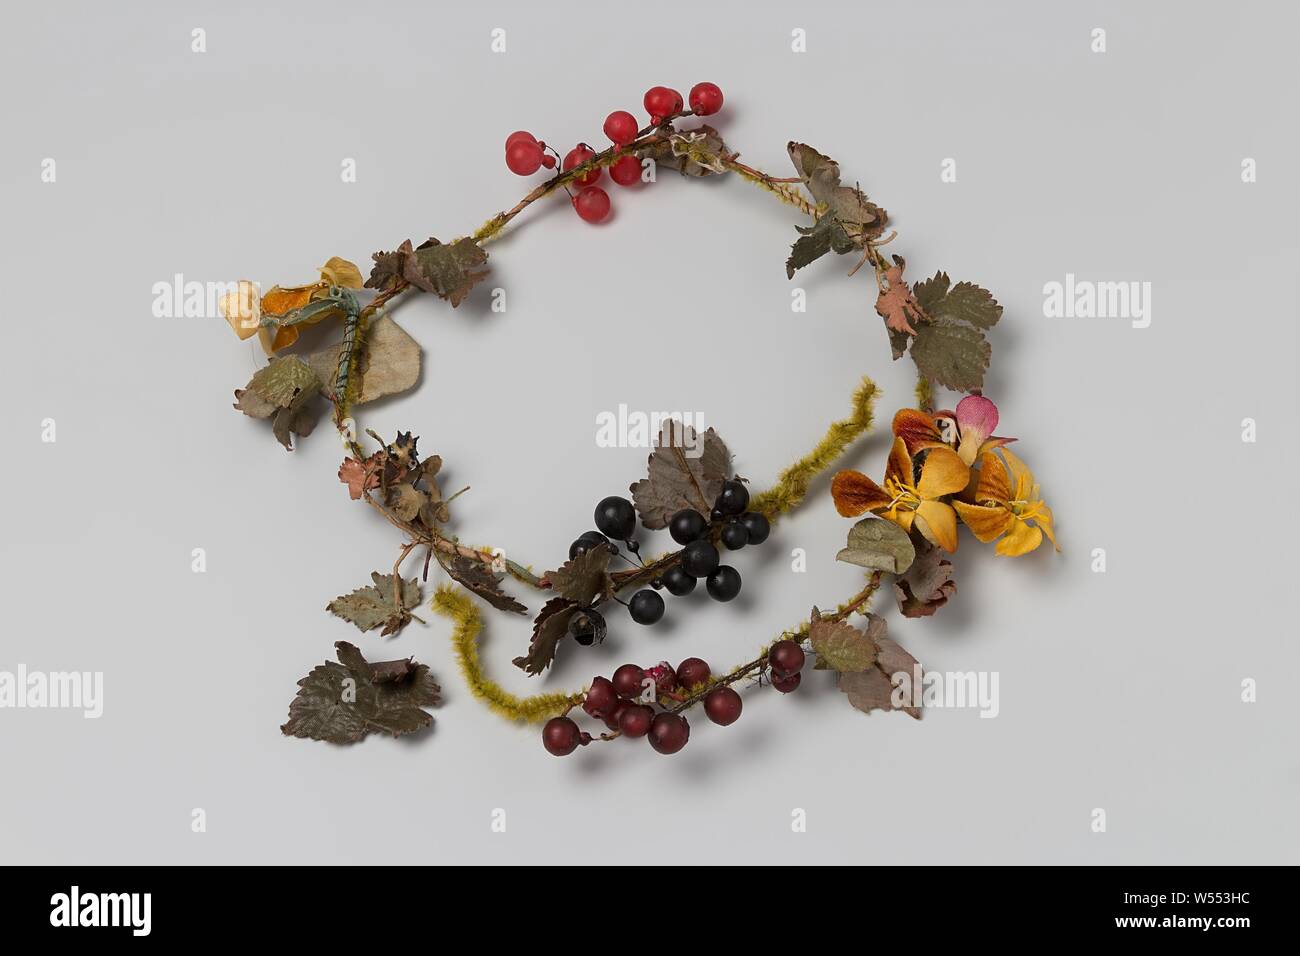 Wreath with yellow flowers, red and black berries and green leaf, Wreath with plastic velvet yellow flowers, plastic red and black berries and green leaf of synthetic silk, branch wrapped with iron wire. Hat garment or corsage., anonymous, Netherlands (possibly), c. 1900 - c. 1910, tak, bloemen, bessen, bladen, l 55 cm × h 3 cm × w 6 cm Stock Photo